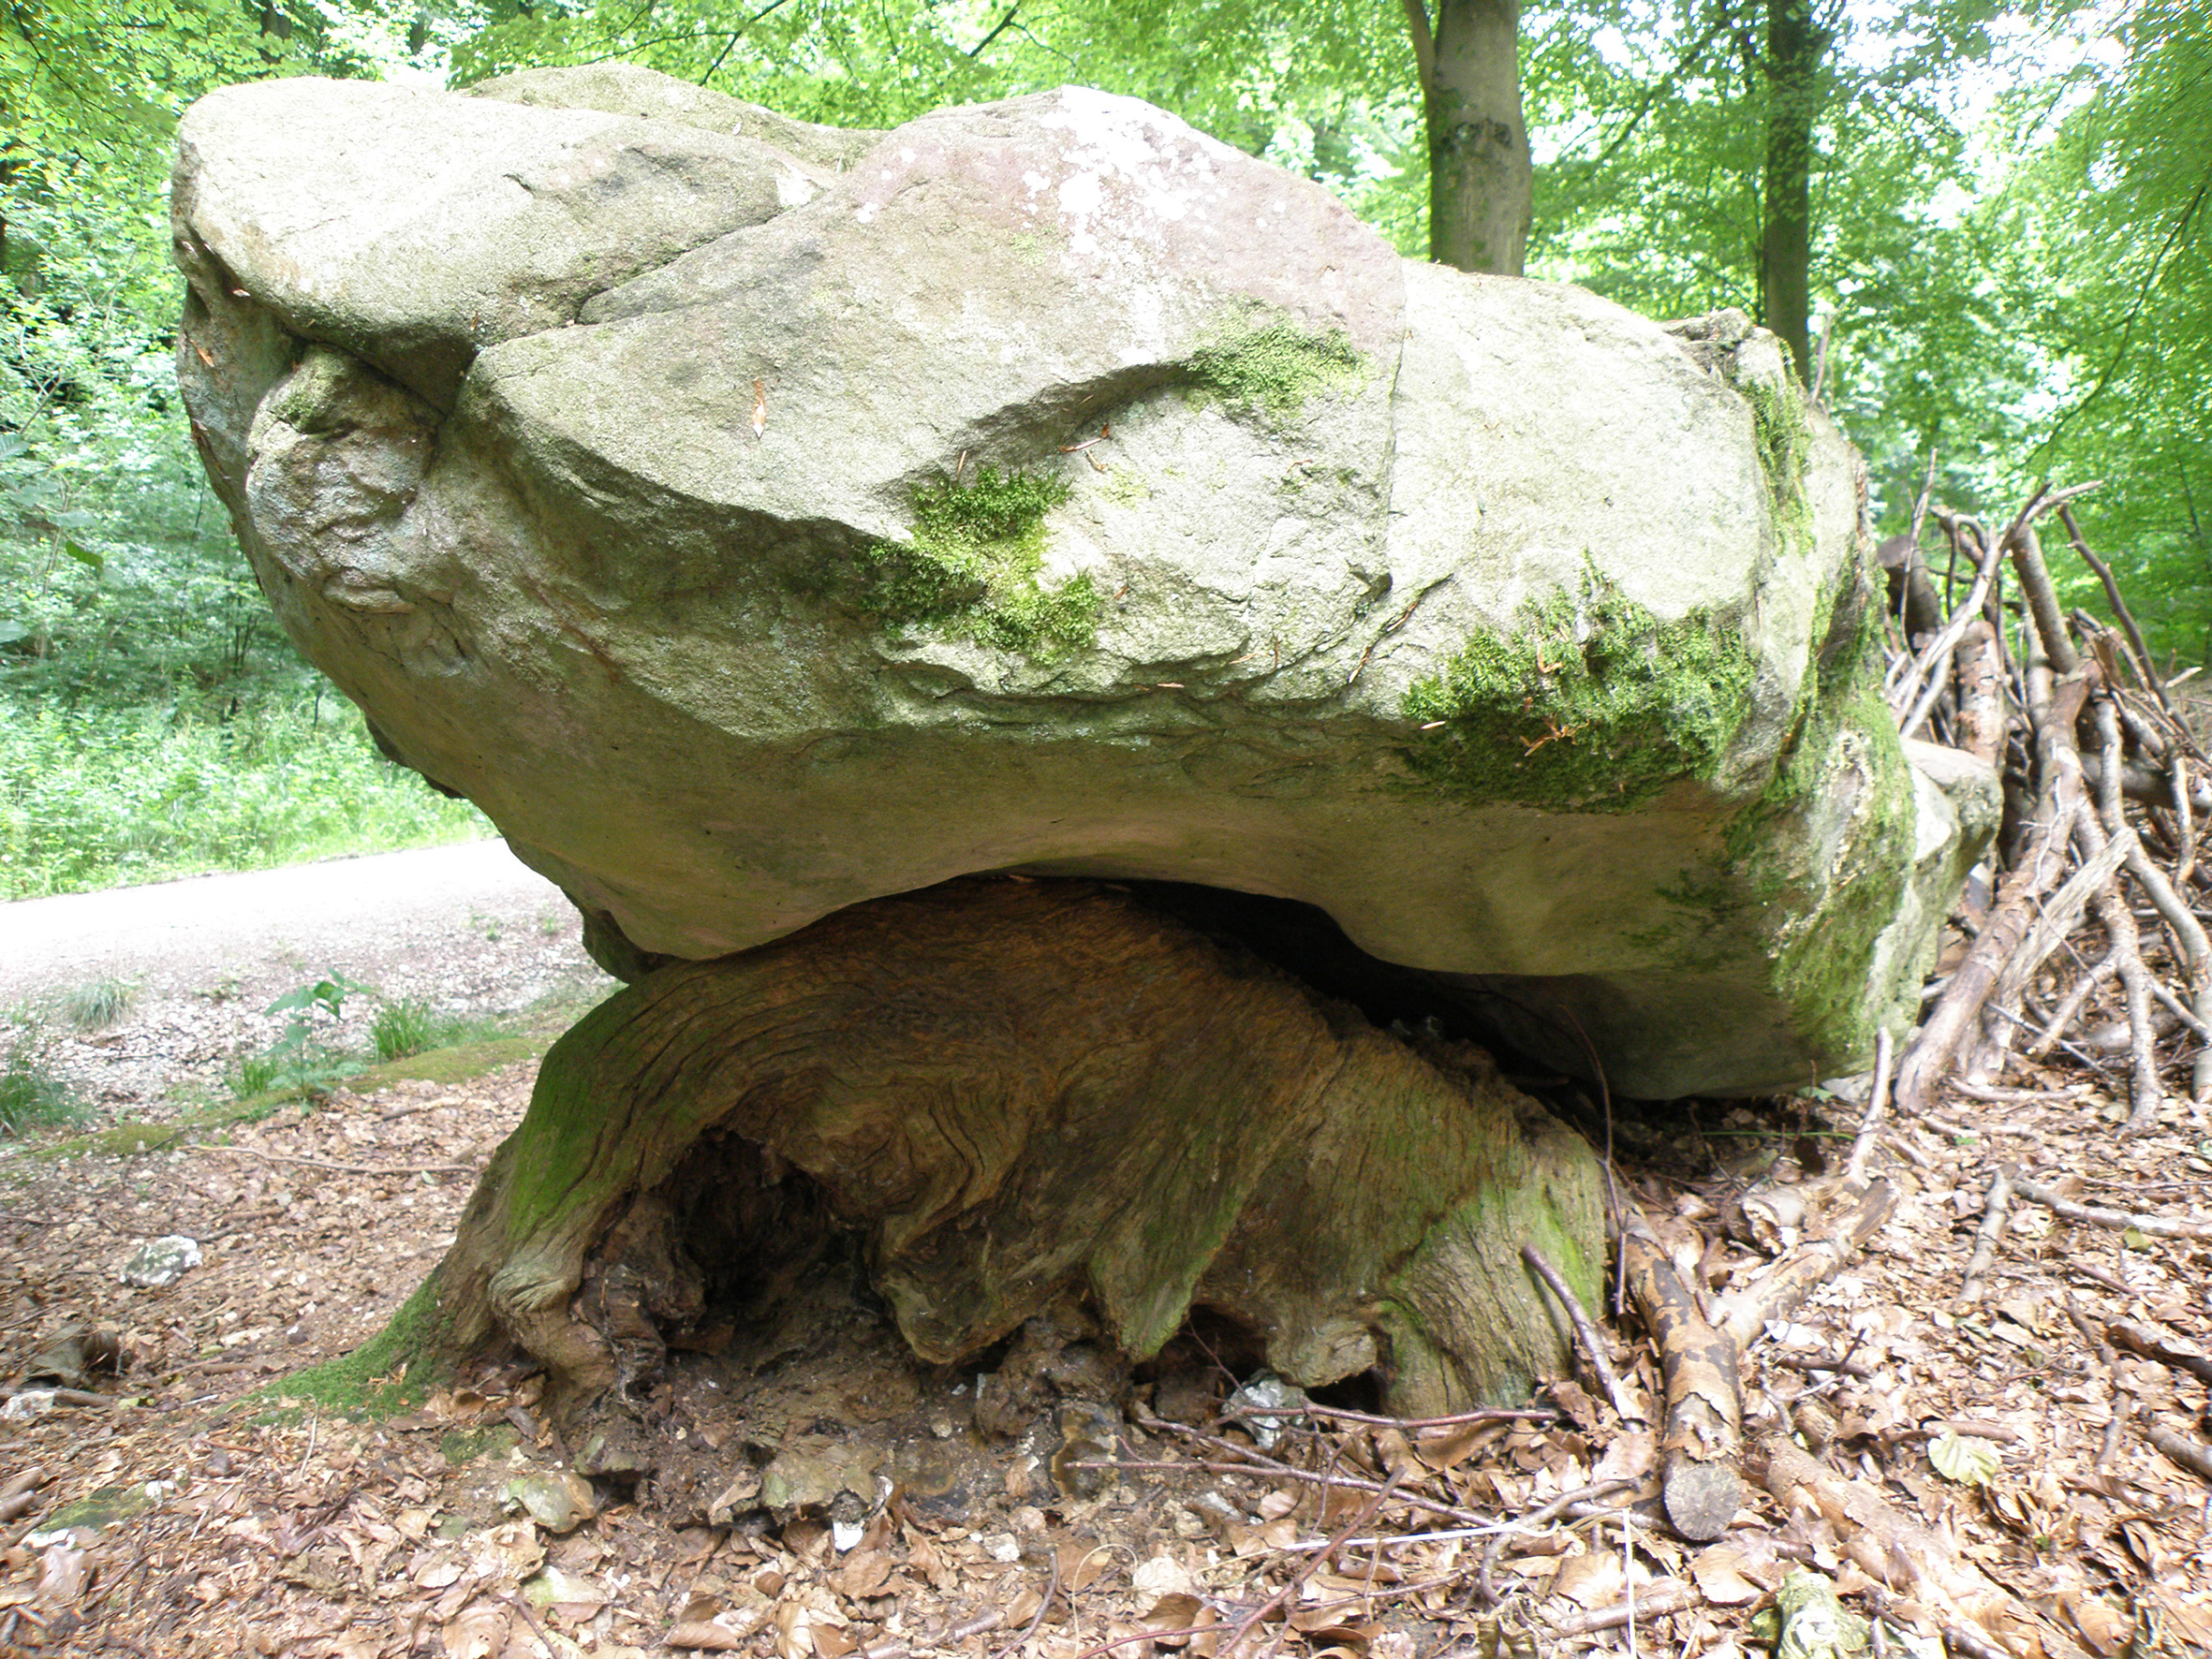 A large sarsen stone at West Woods, the probable source area for most sarsens used to construct Stonehenge